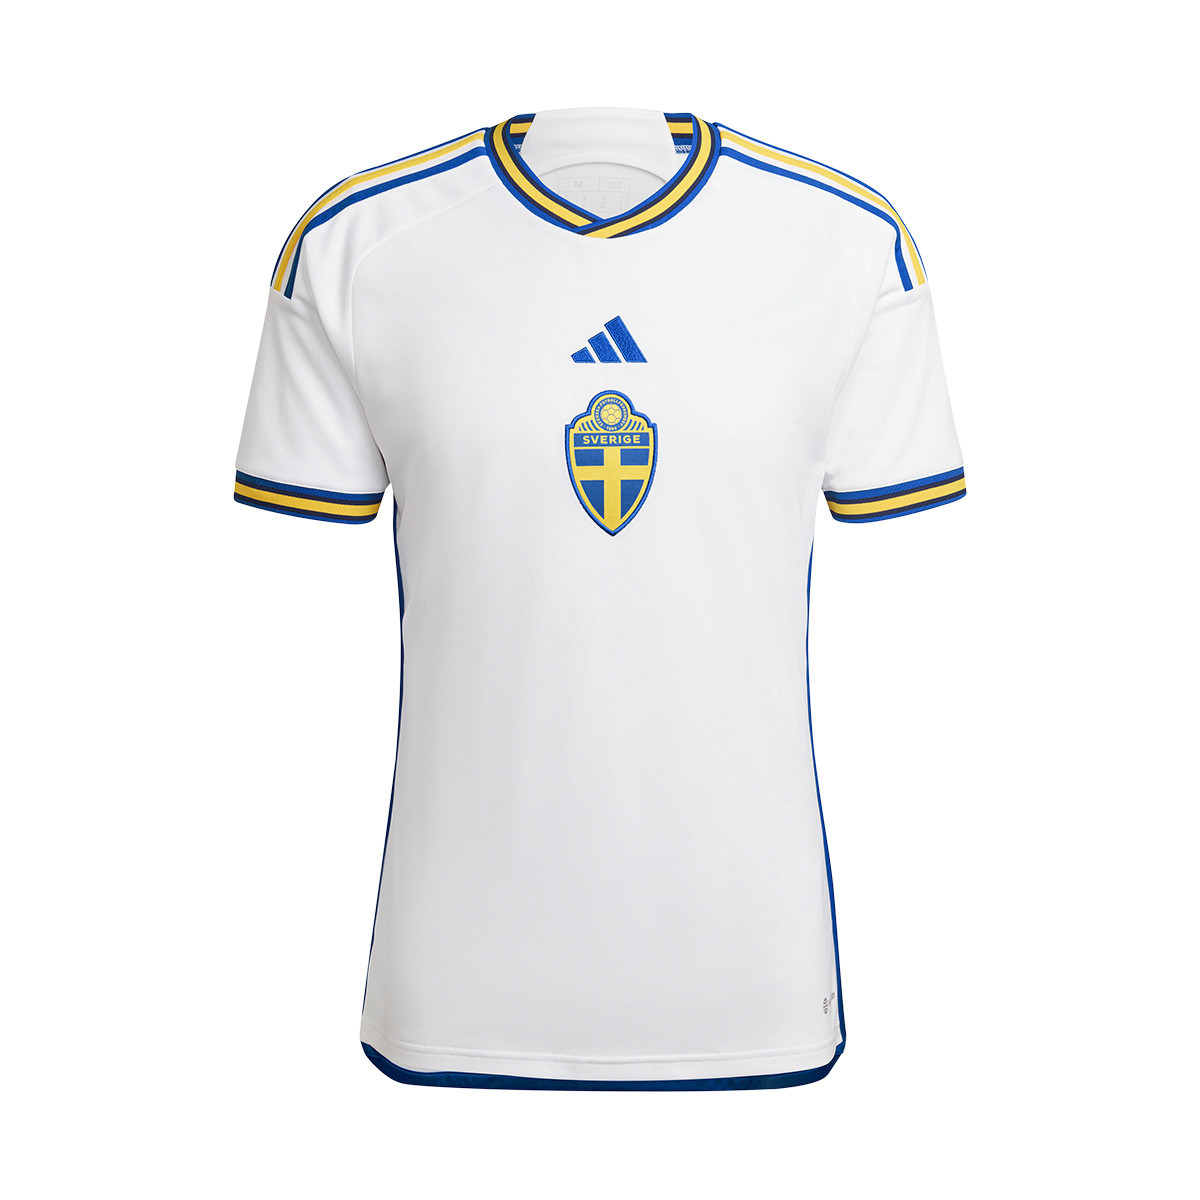 Sweden Women Release New Adidas Jersey With Guide On How To Stop Them